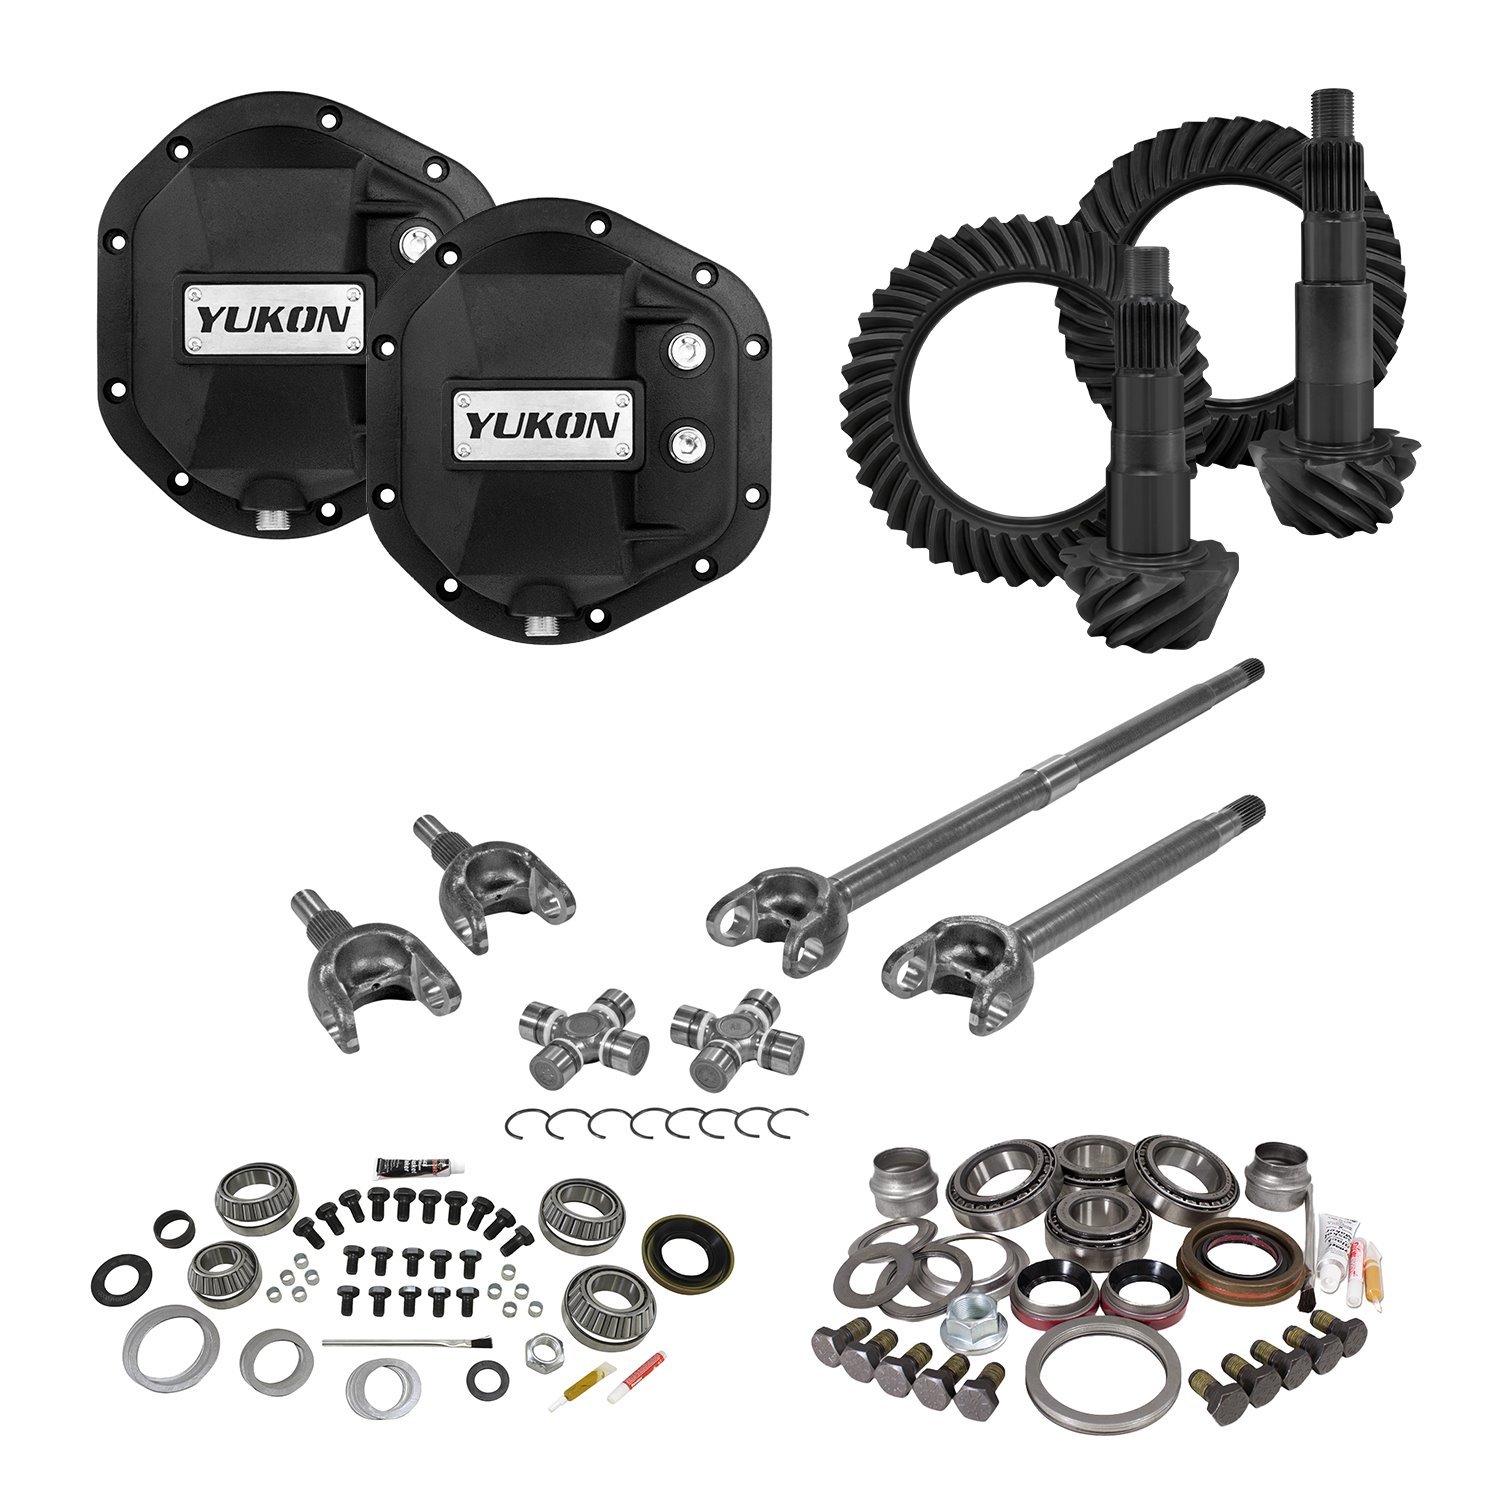 Stage 3 Jeep Jk Re-Gear Kit W/Covers, Front Axles, Dana 44, 5.38 Ratio